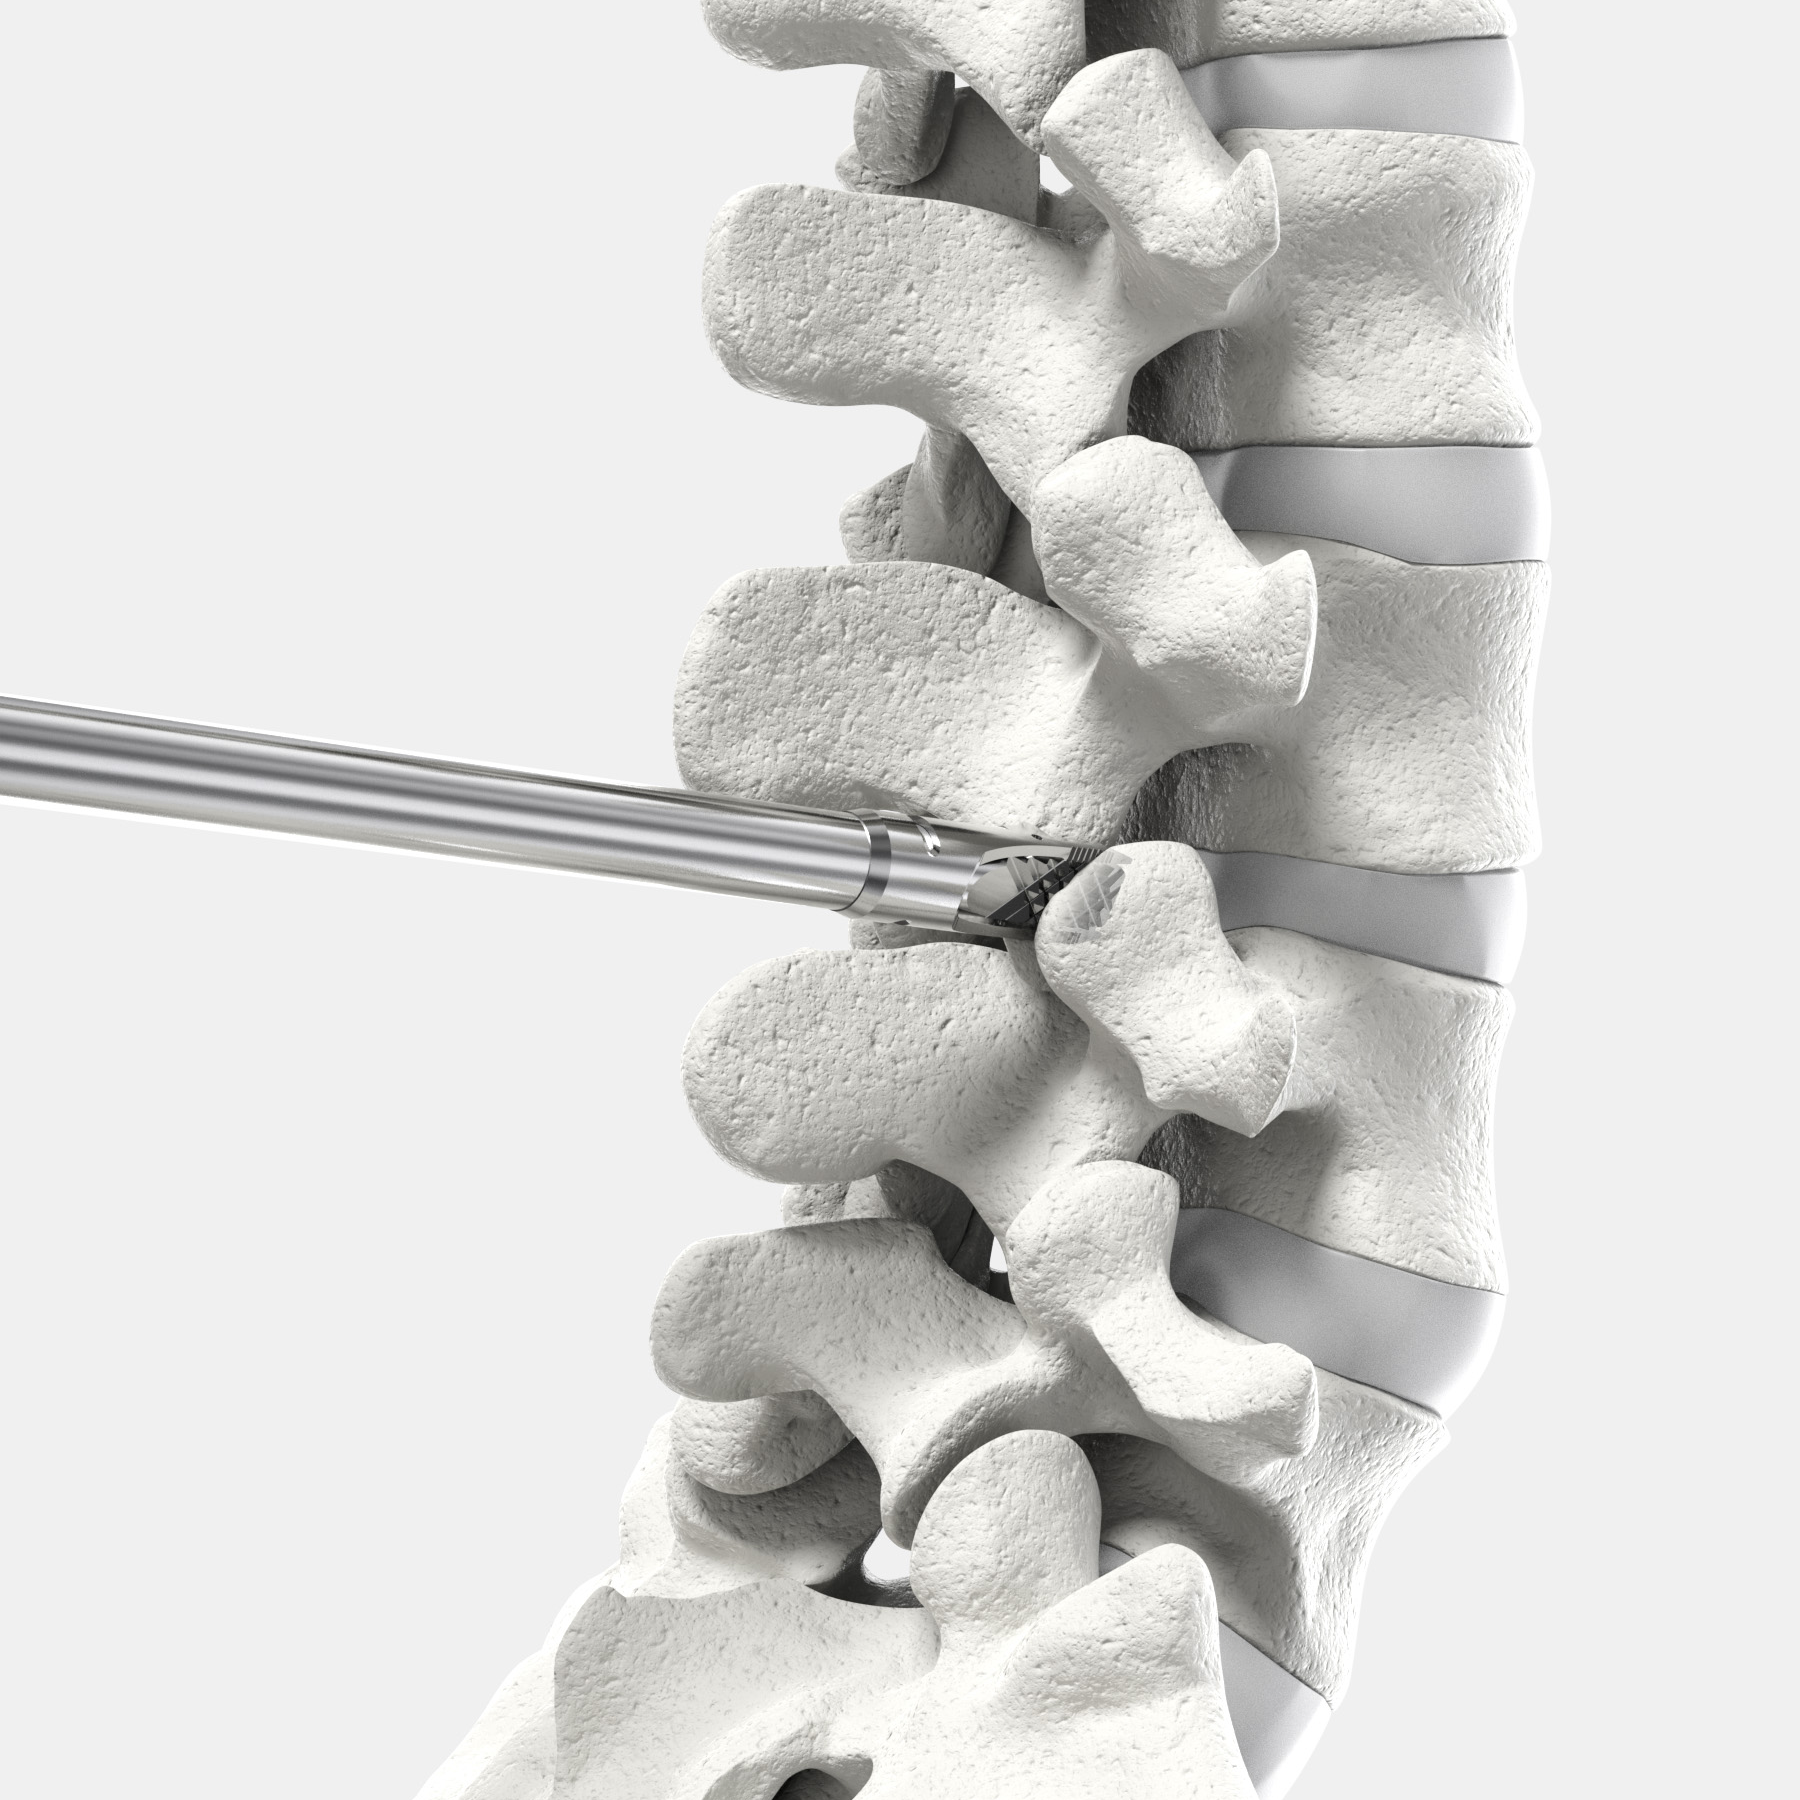 CORUS™ Spinal System-LX in a lumbar spine. Its Decortication Rasp provides thorough and precise bone preparation.